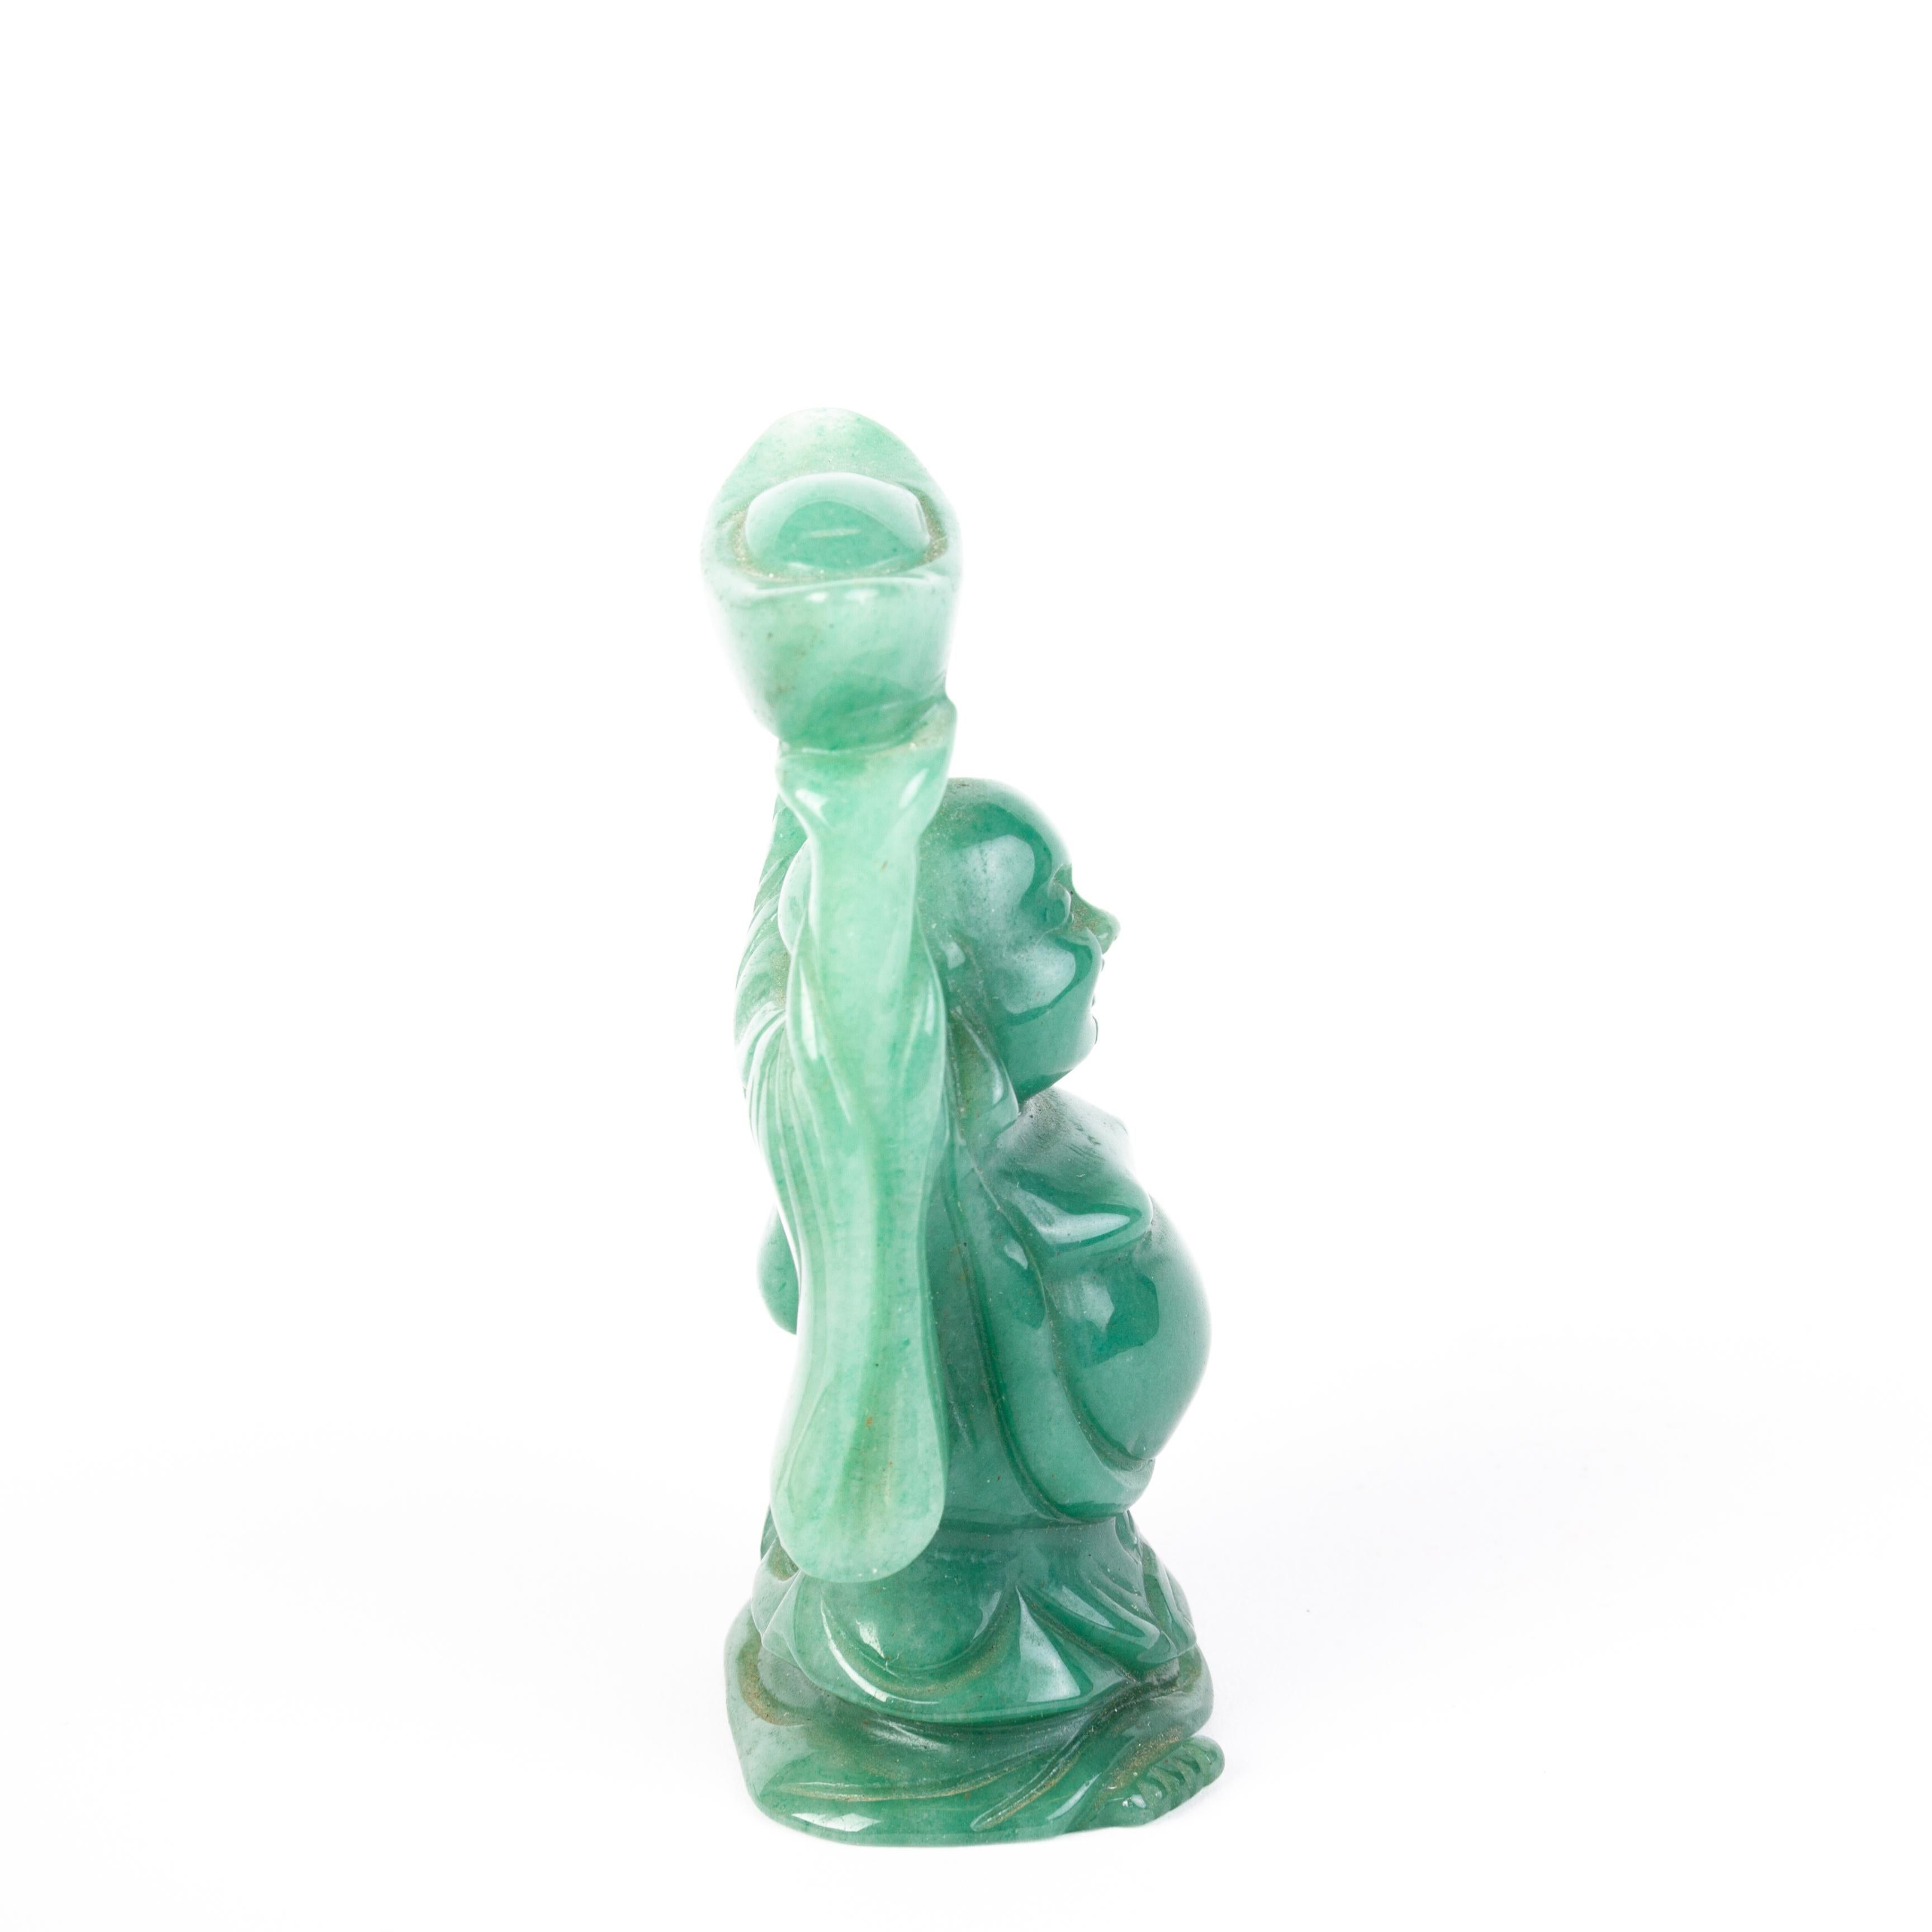 A finely carved Chinese jade sculpture of Buddha.
1820 to 1880 China, Qing Dynasty.
Very good condition.
From a private collection.
Free international shipping.